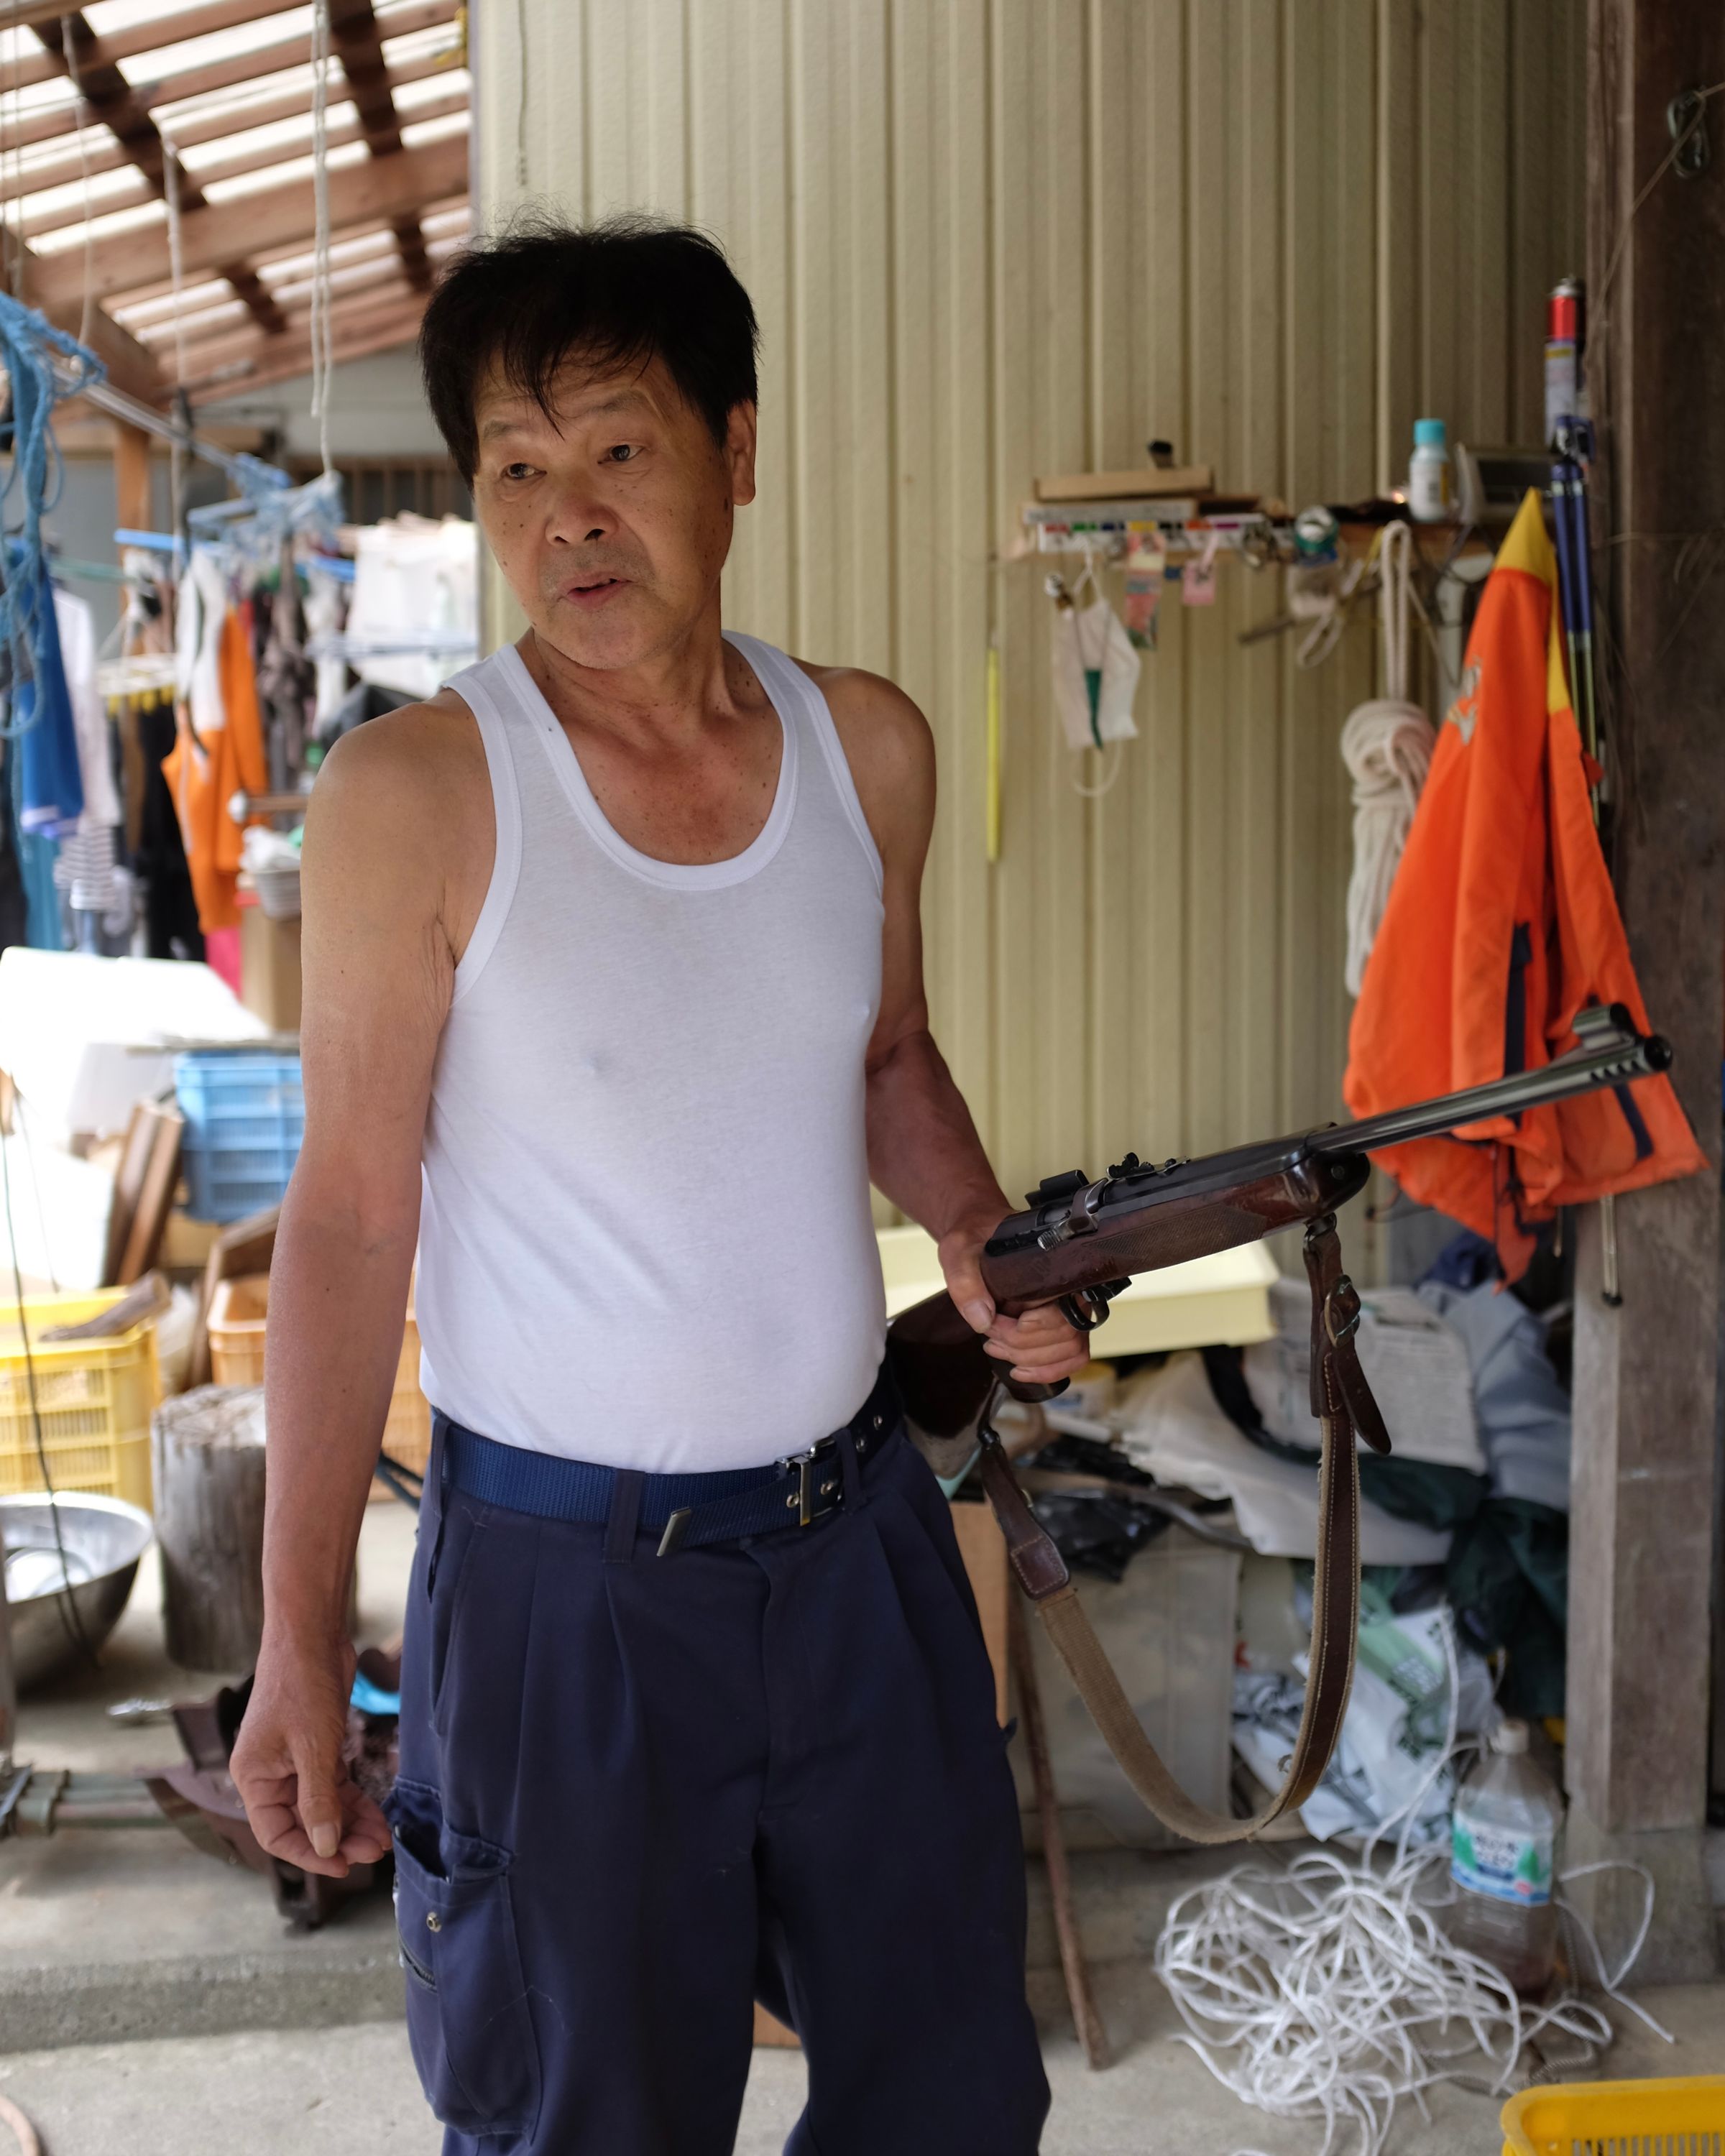 The same Japanese man, dressed in a sleeveless t-shirt, holds a rifle in his left hand while looking off-camera.